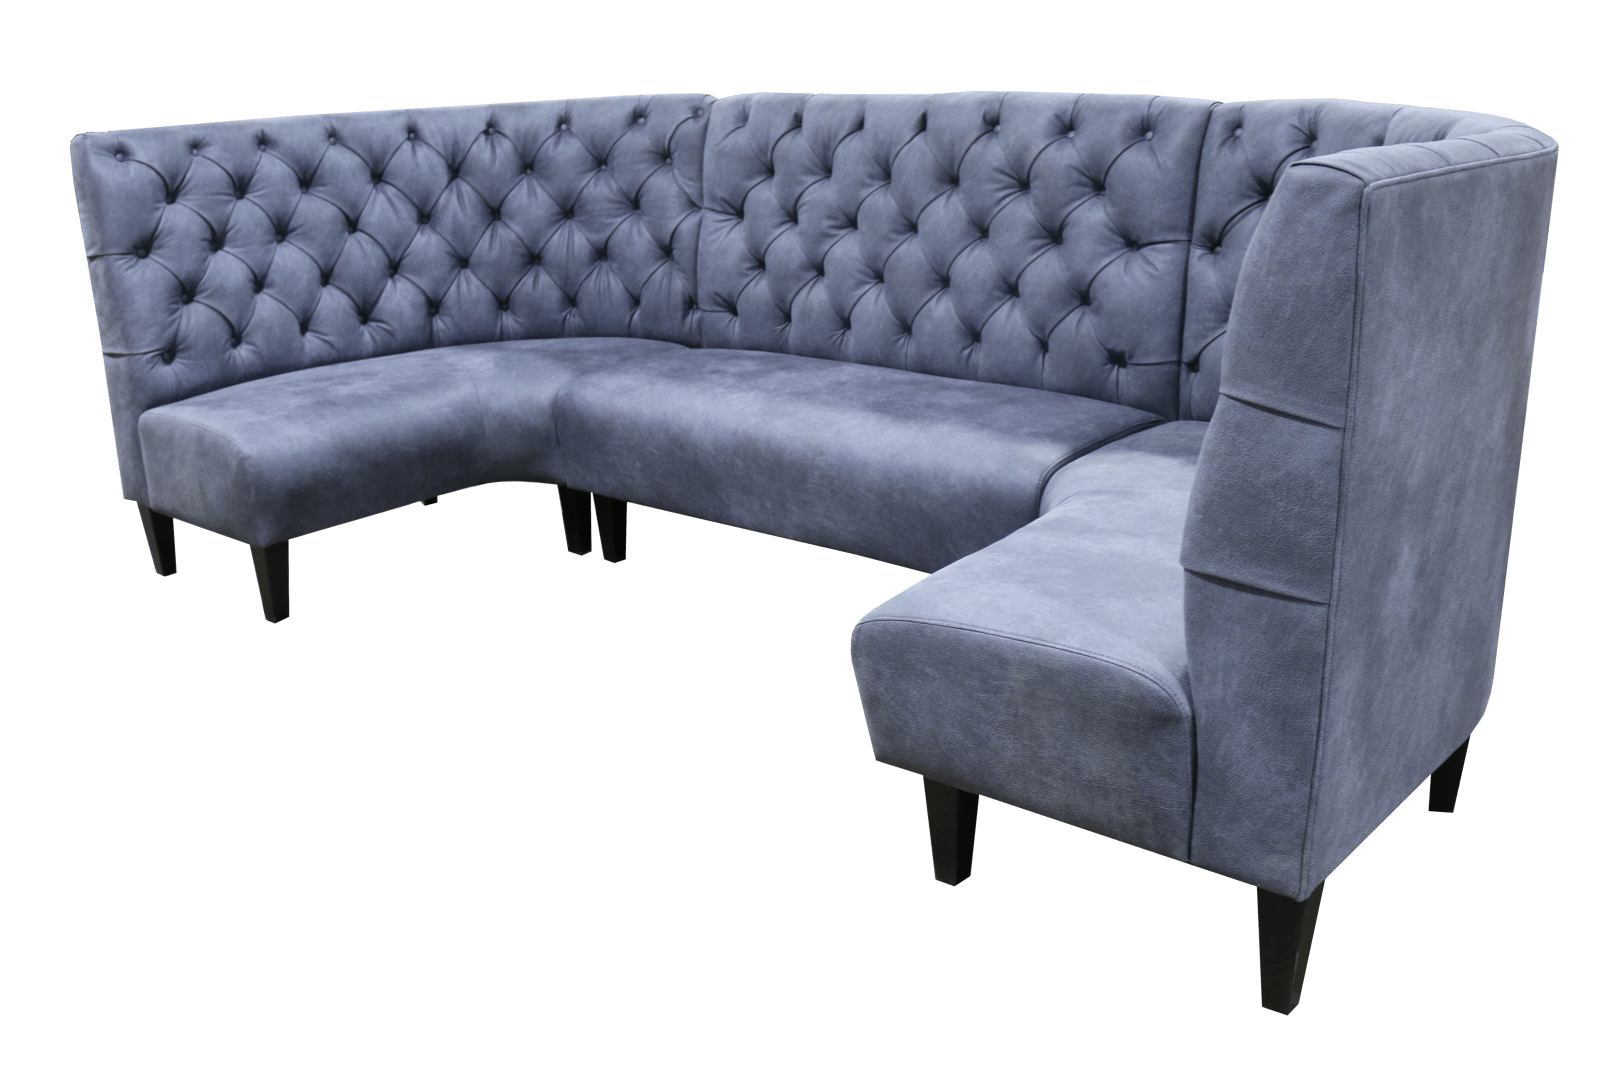 u-shaped-light-blue-suede-tufted-couch